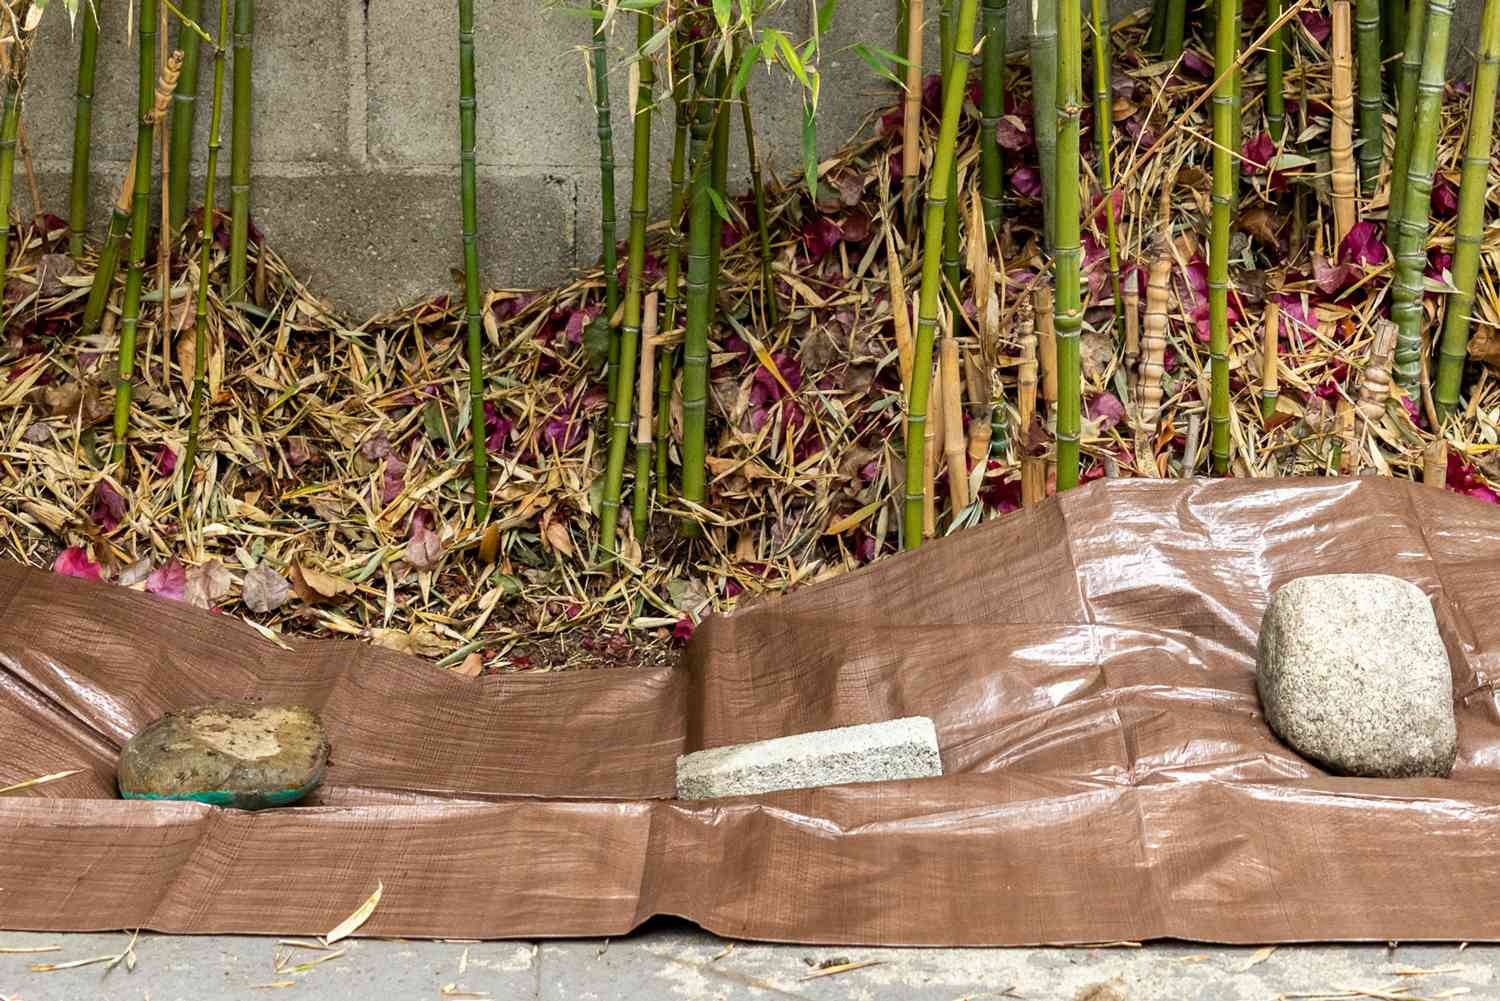 Brown tarps covering area of cut bamboo with rocks